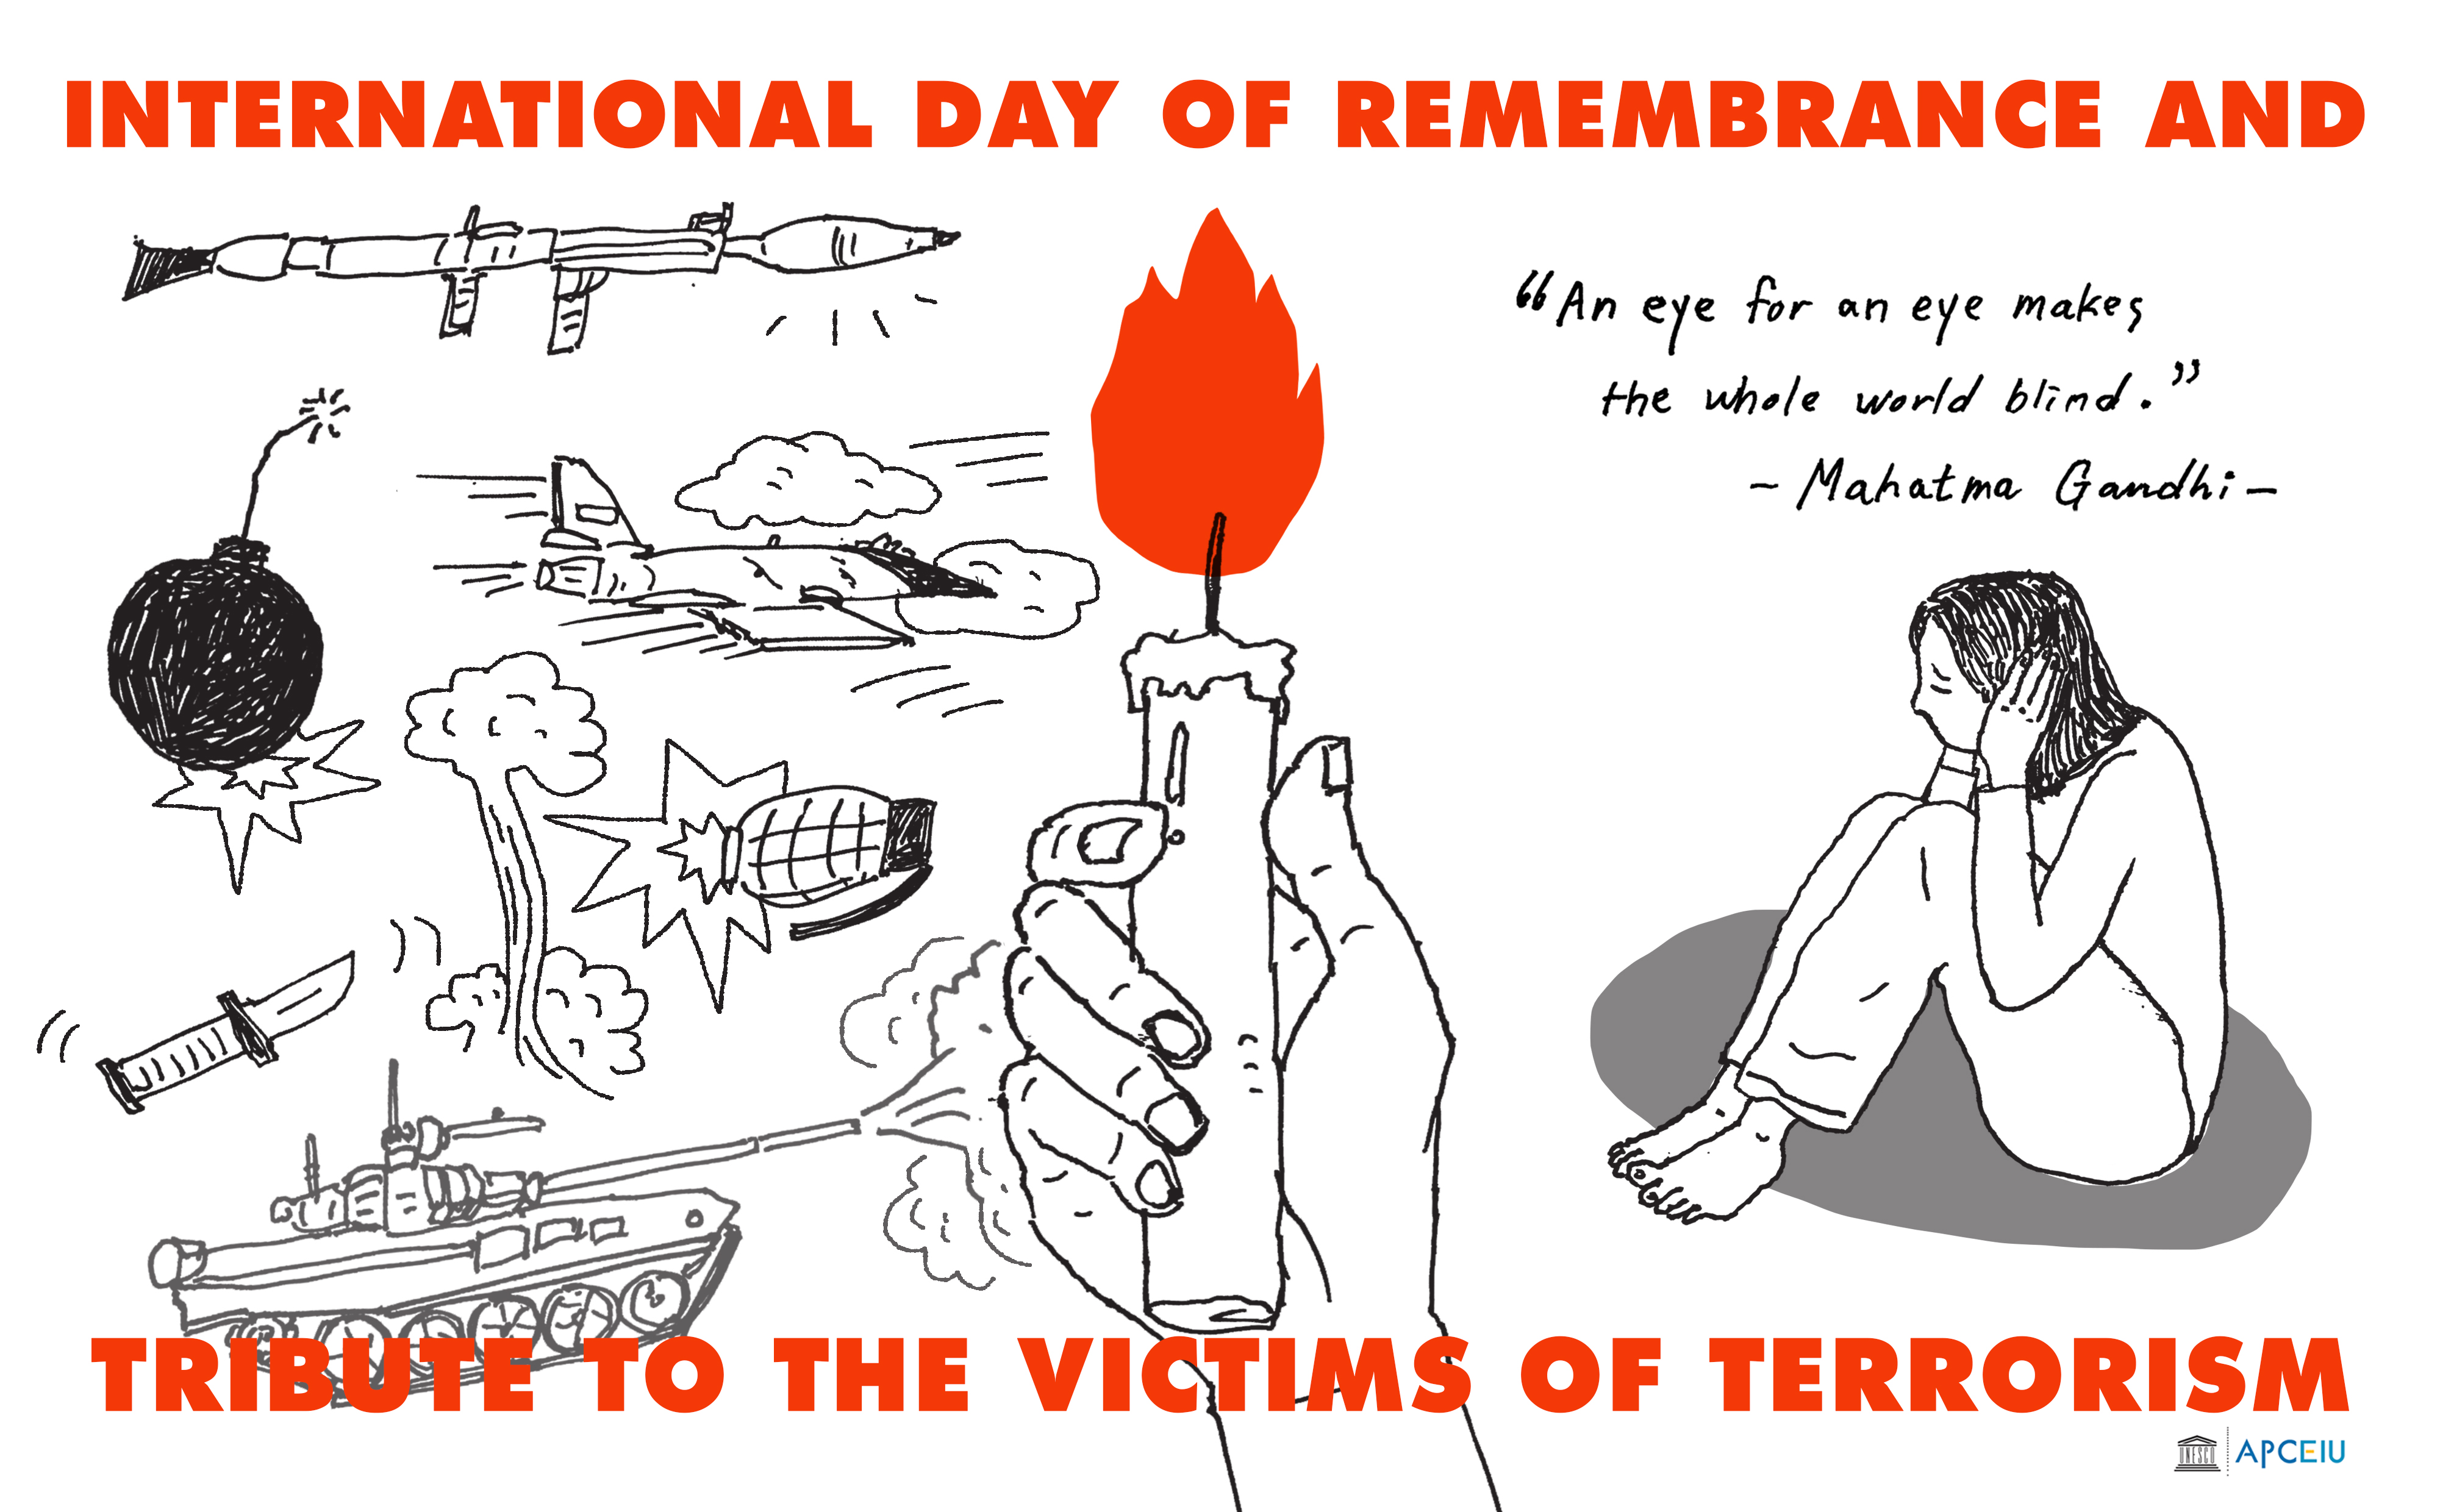 International Day of Remembrance and Tribute to the Victims of Terrorism.jpg